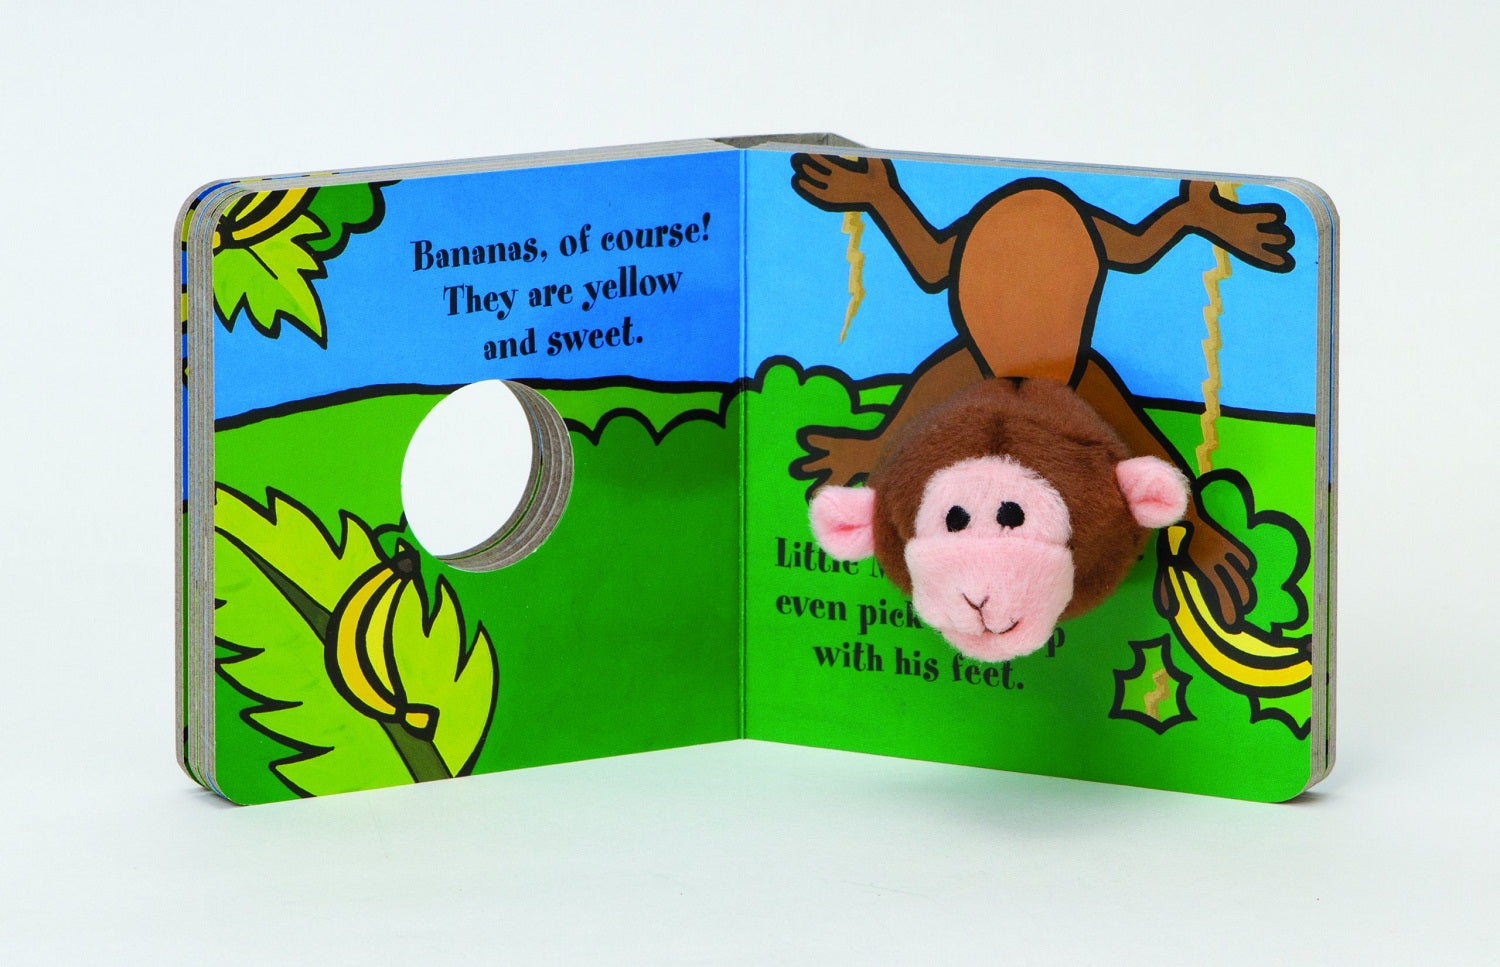 Little Monkey: Finger Puppet Book: (Finger Puppet Book for Toddlers and Babies, Baby Books for First Year, Animal Finger Puppets)